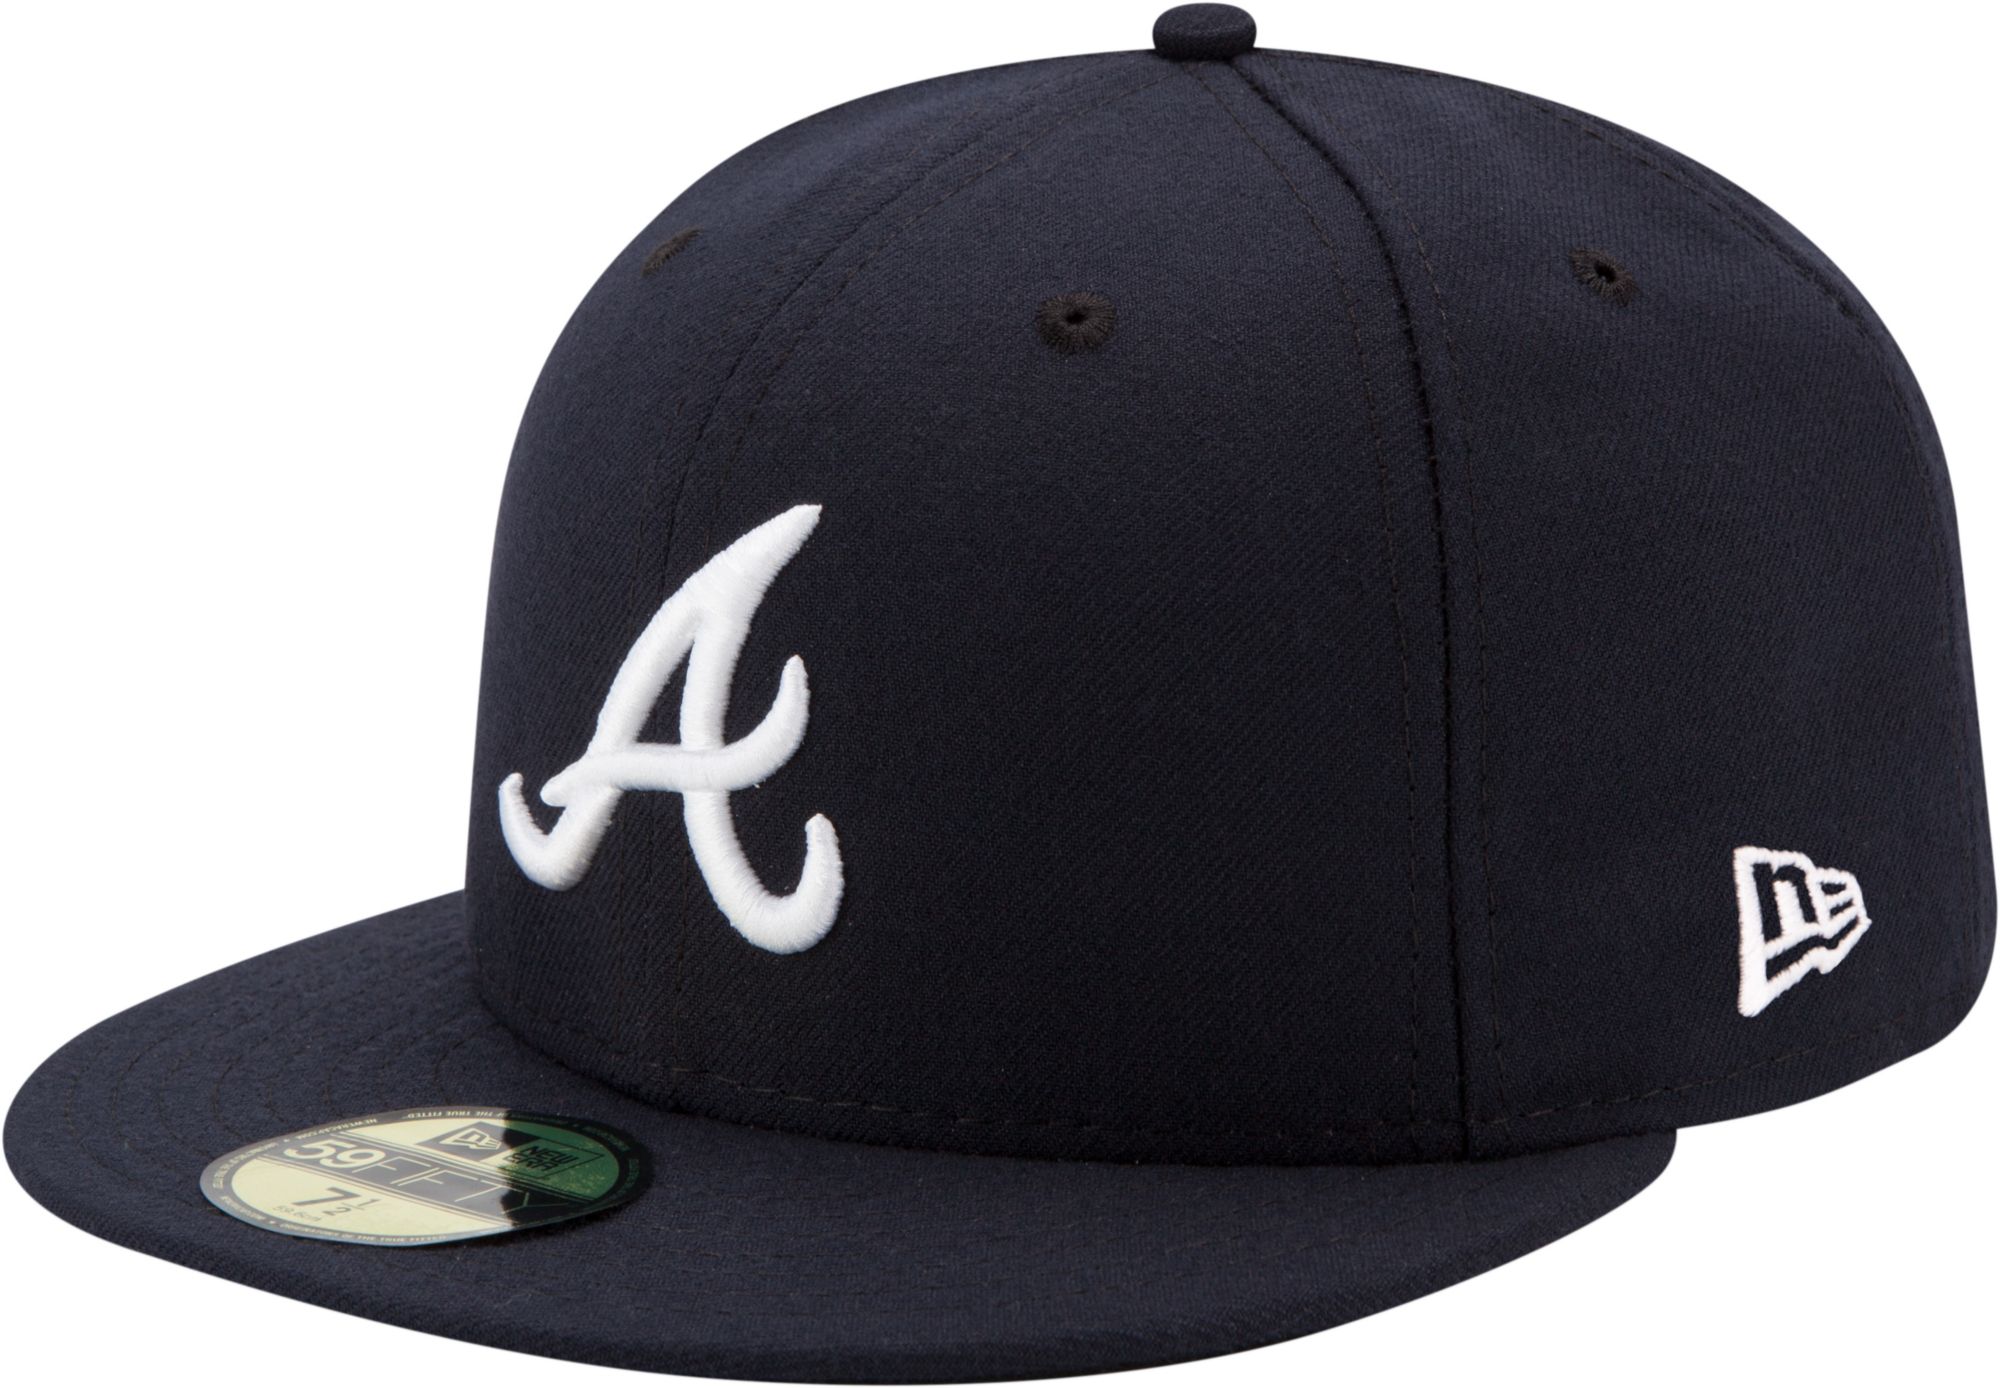 Atlanta Braves Dark Gray Clean Up Adjustable Hat, Adult One Size Fits All